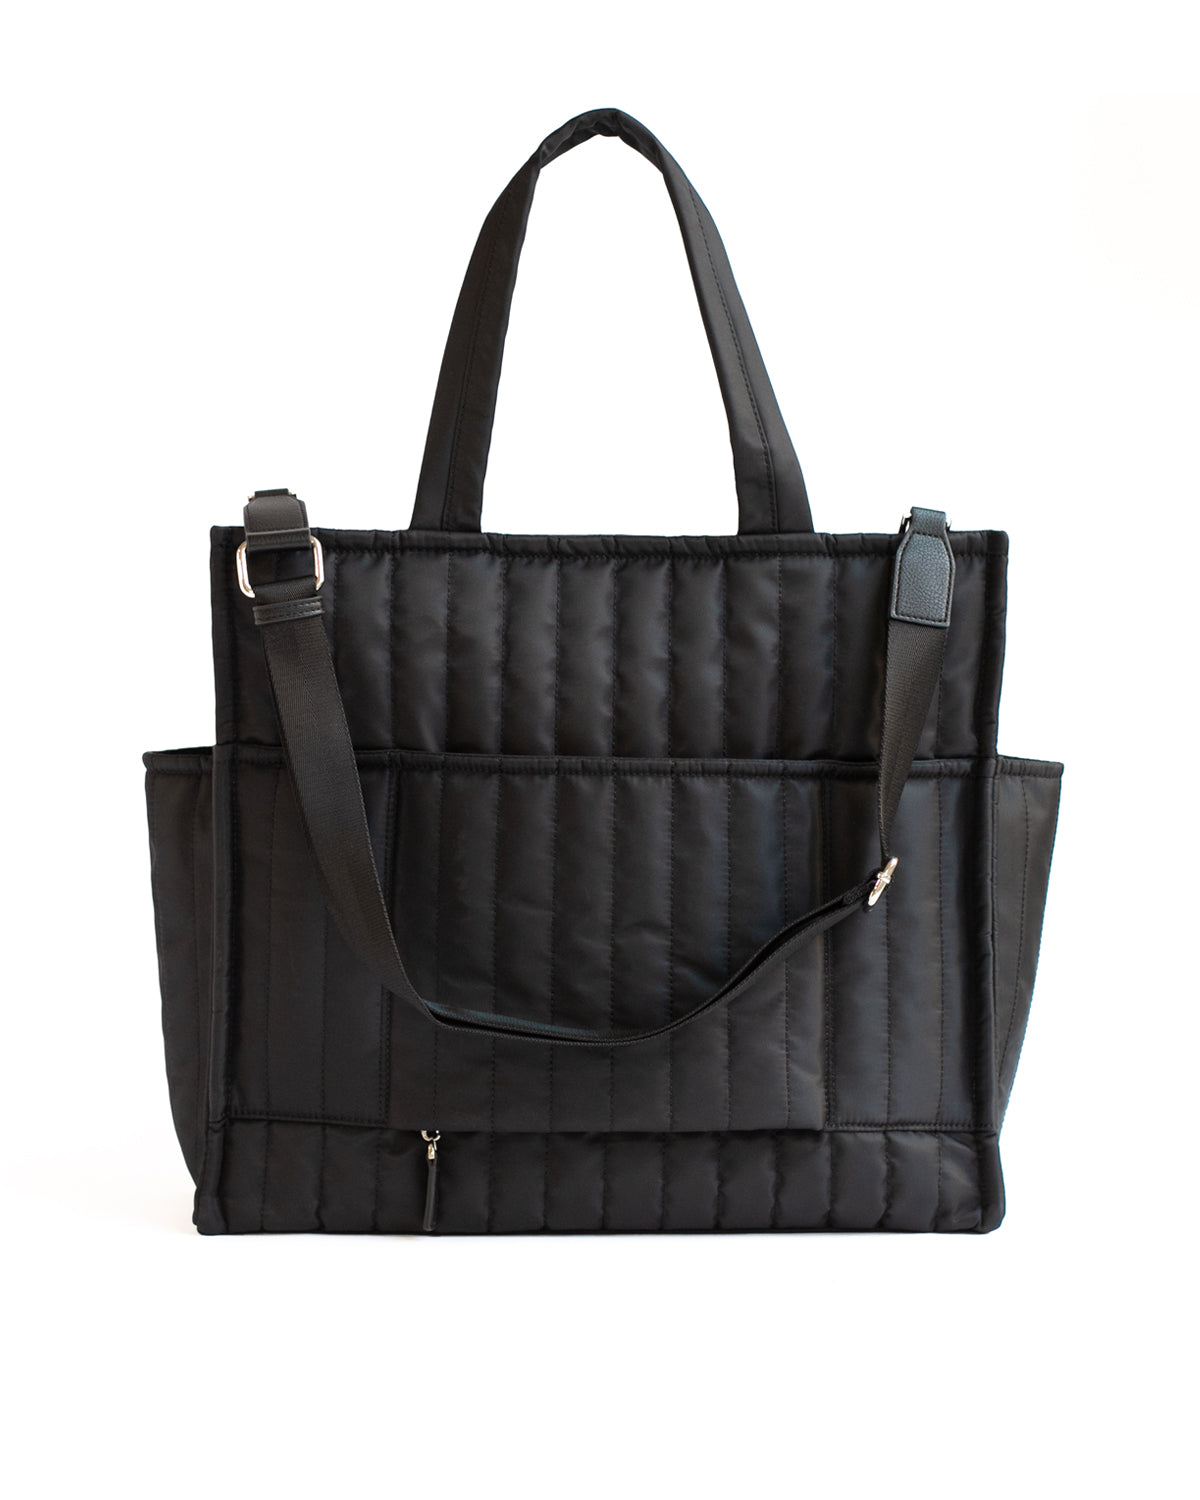 Maedn Bags - black quilted tote